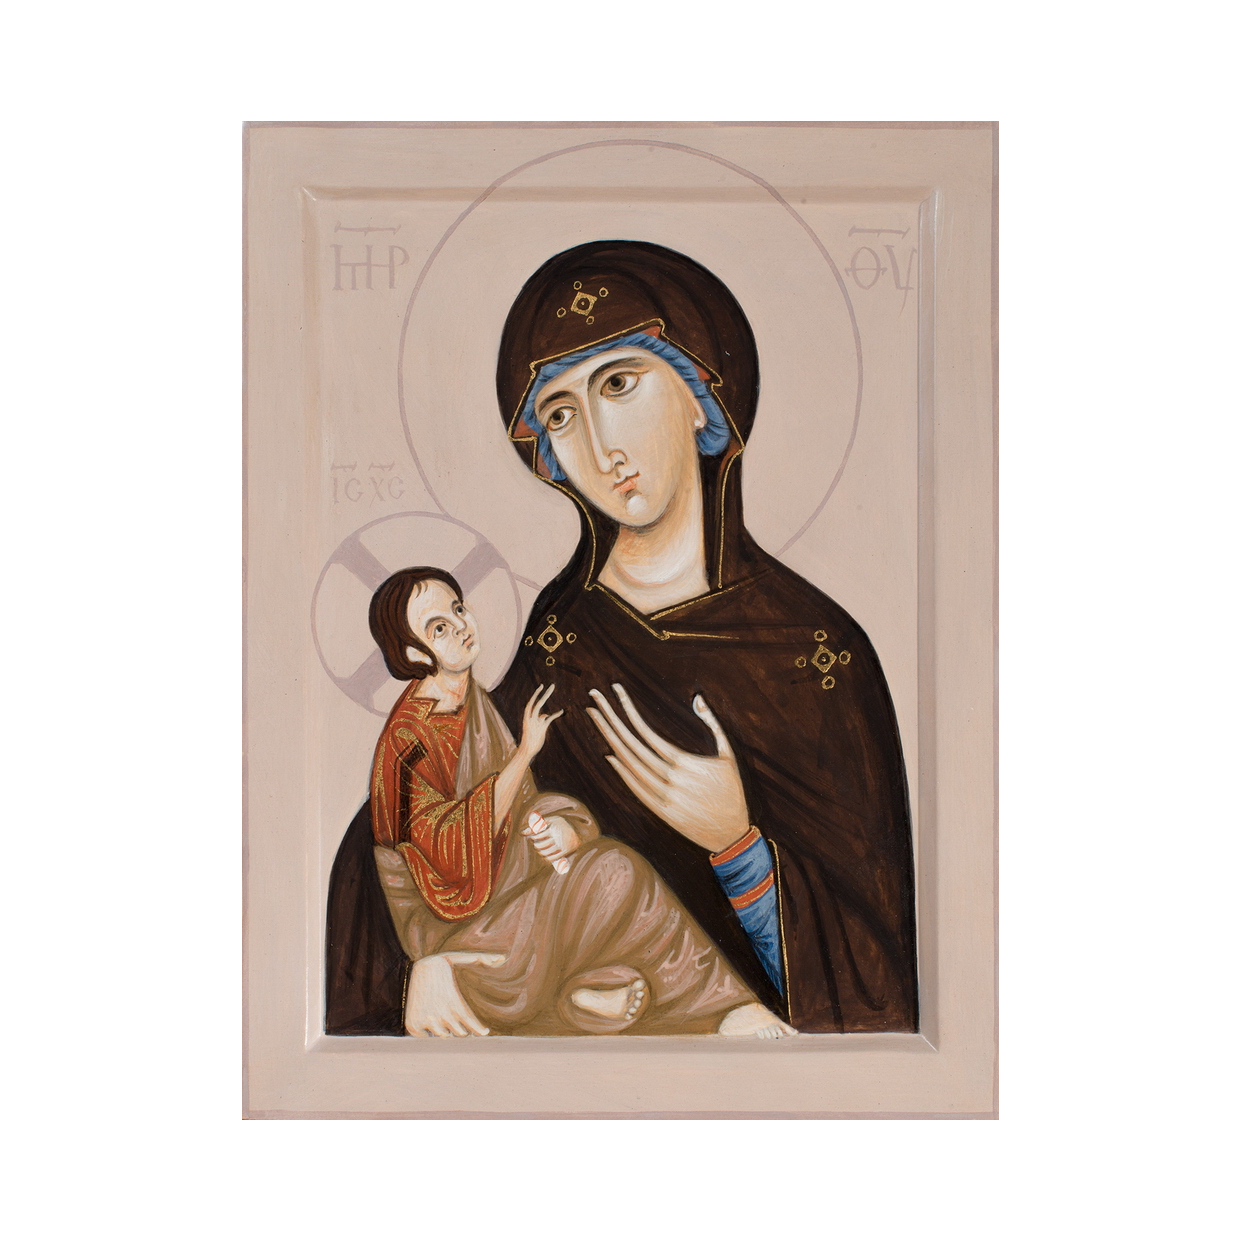 The Mother of God with Christ Child